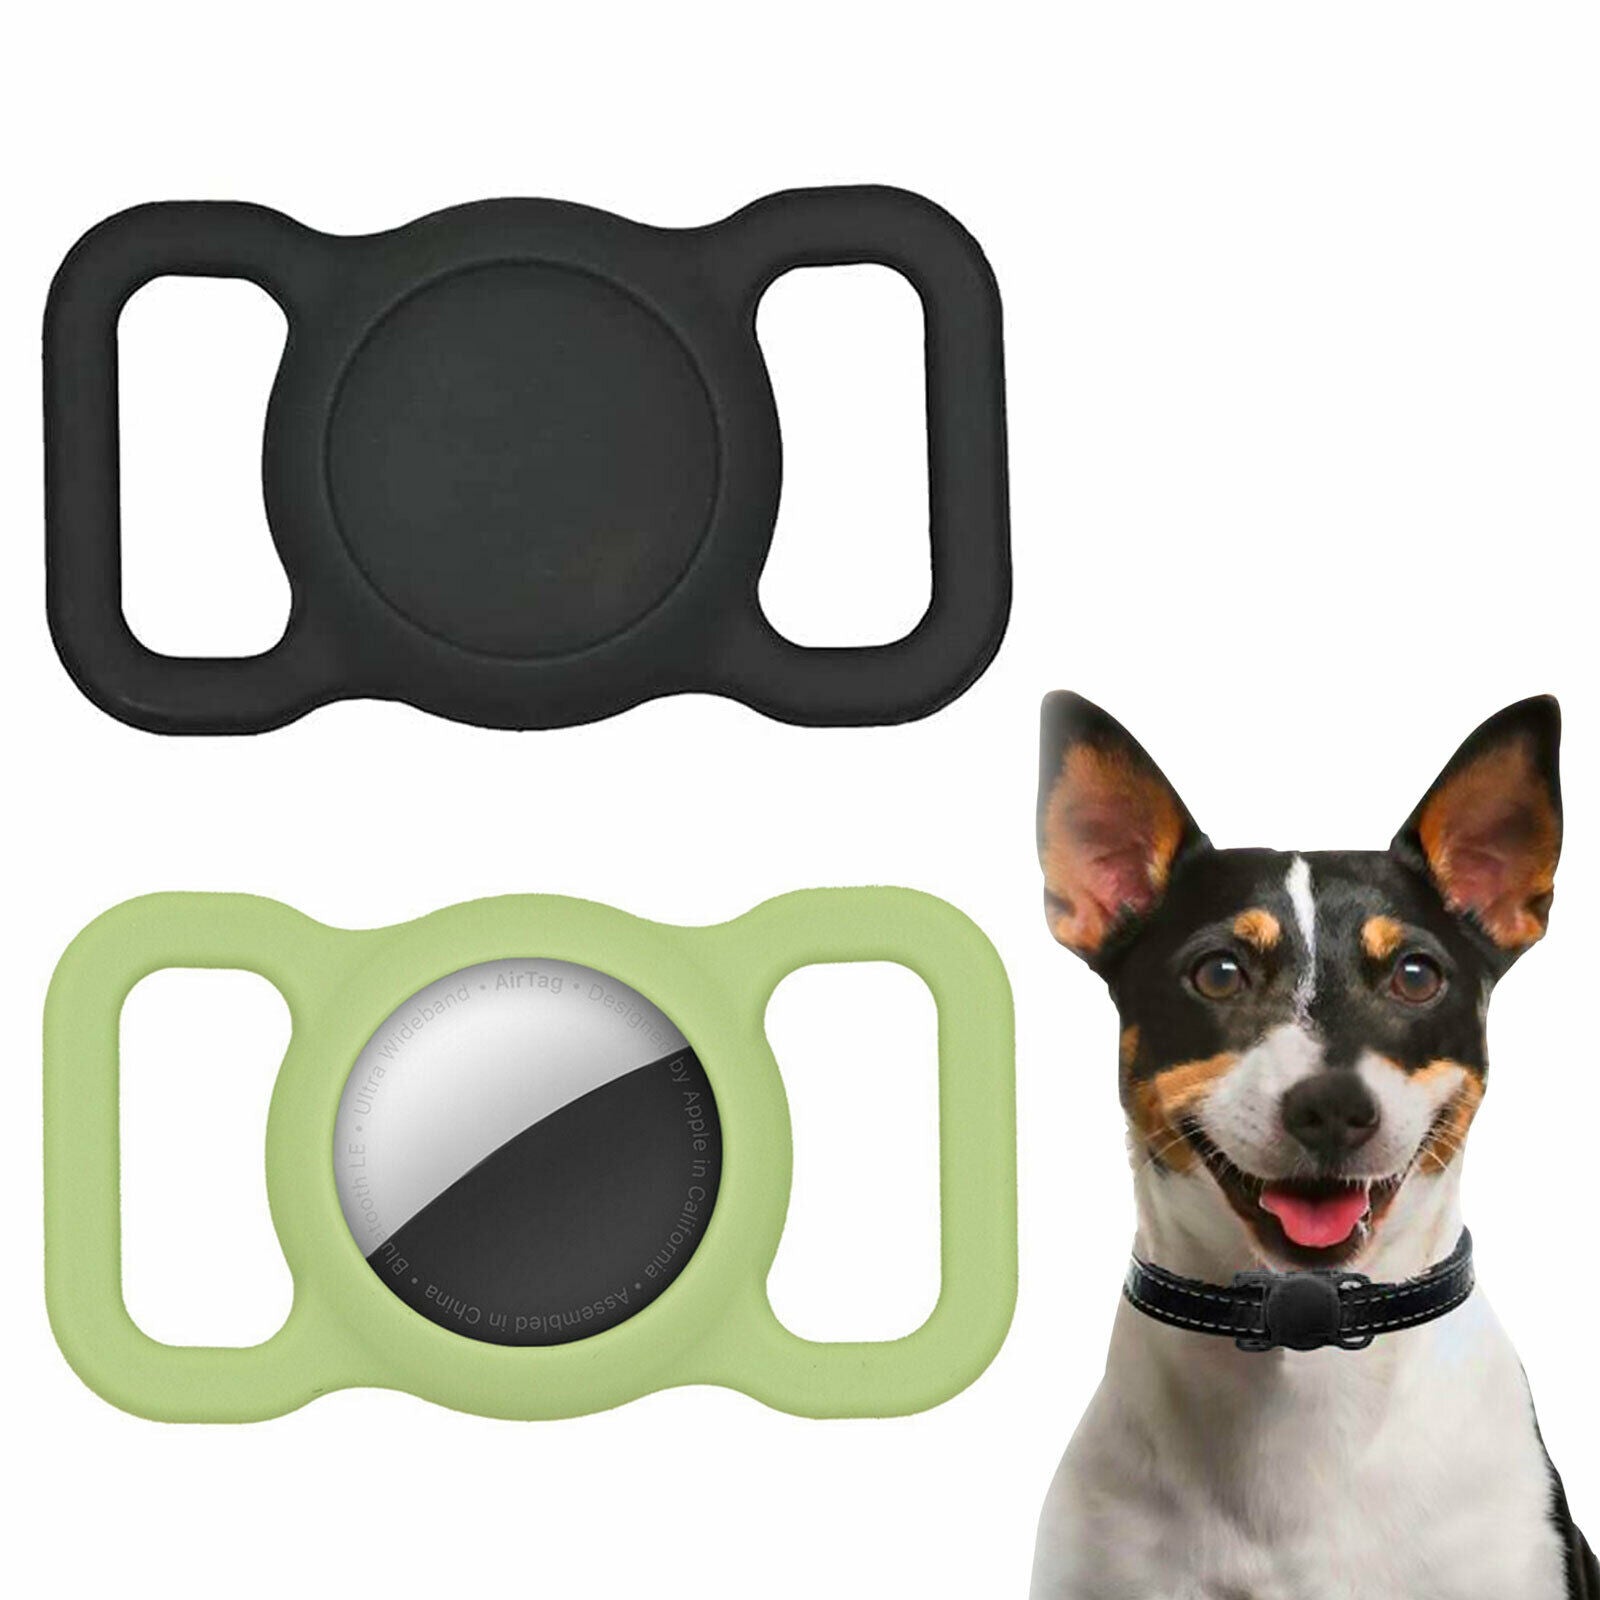 Silicone Pet Protective Case for Airtag Loop Apple GPS Finder Dog Cat Collar AU